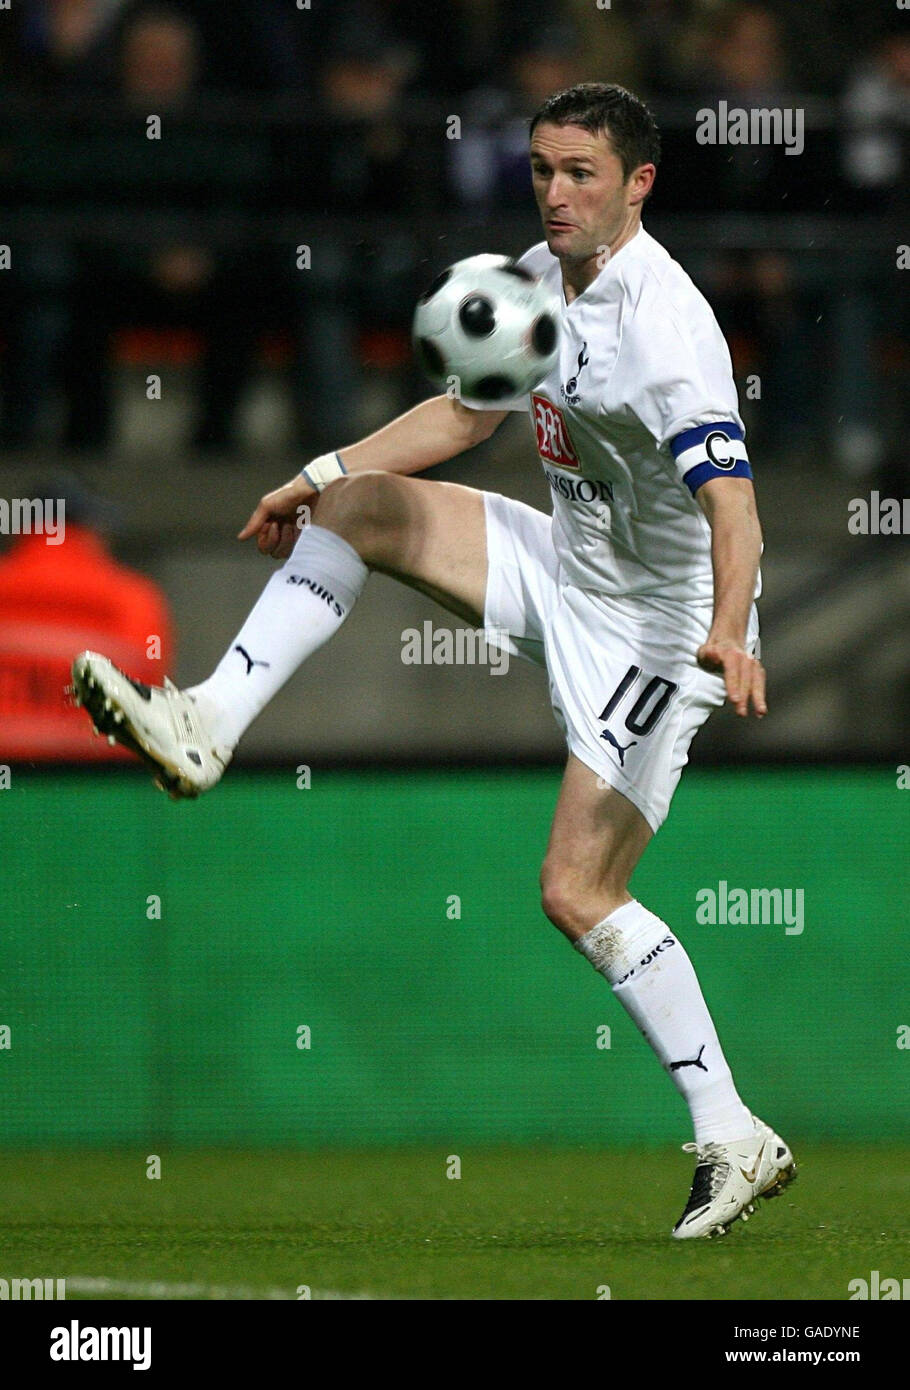 Tottenham Hotspur's Robbie Keane in action during the UEFA Group G match at the Constant Vanden Stock Stadium, Brussels. Stock Photo